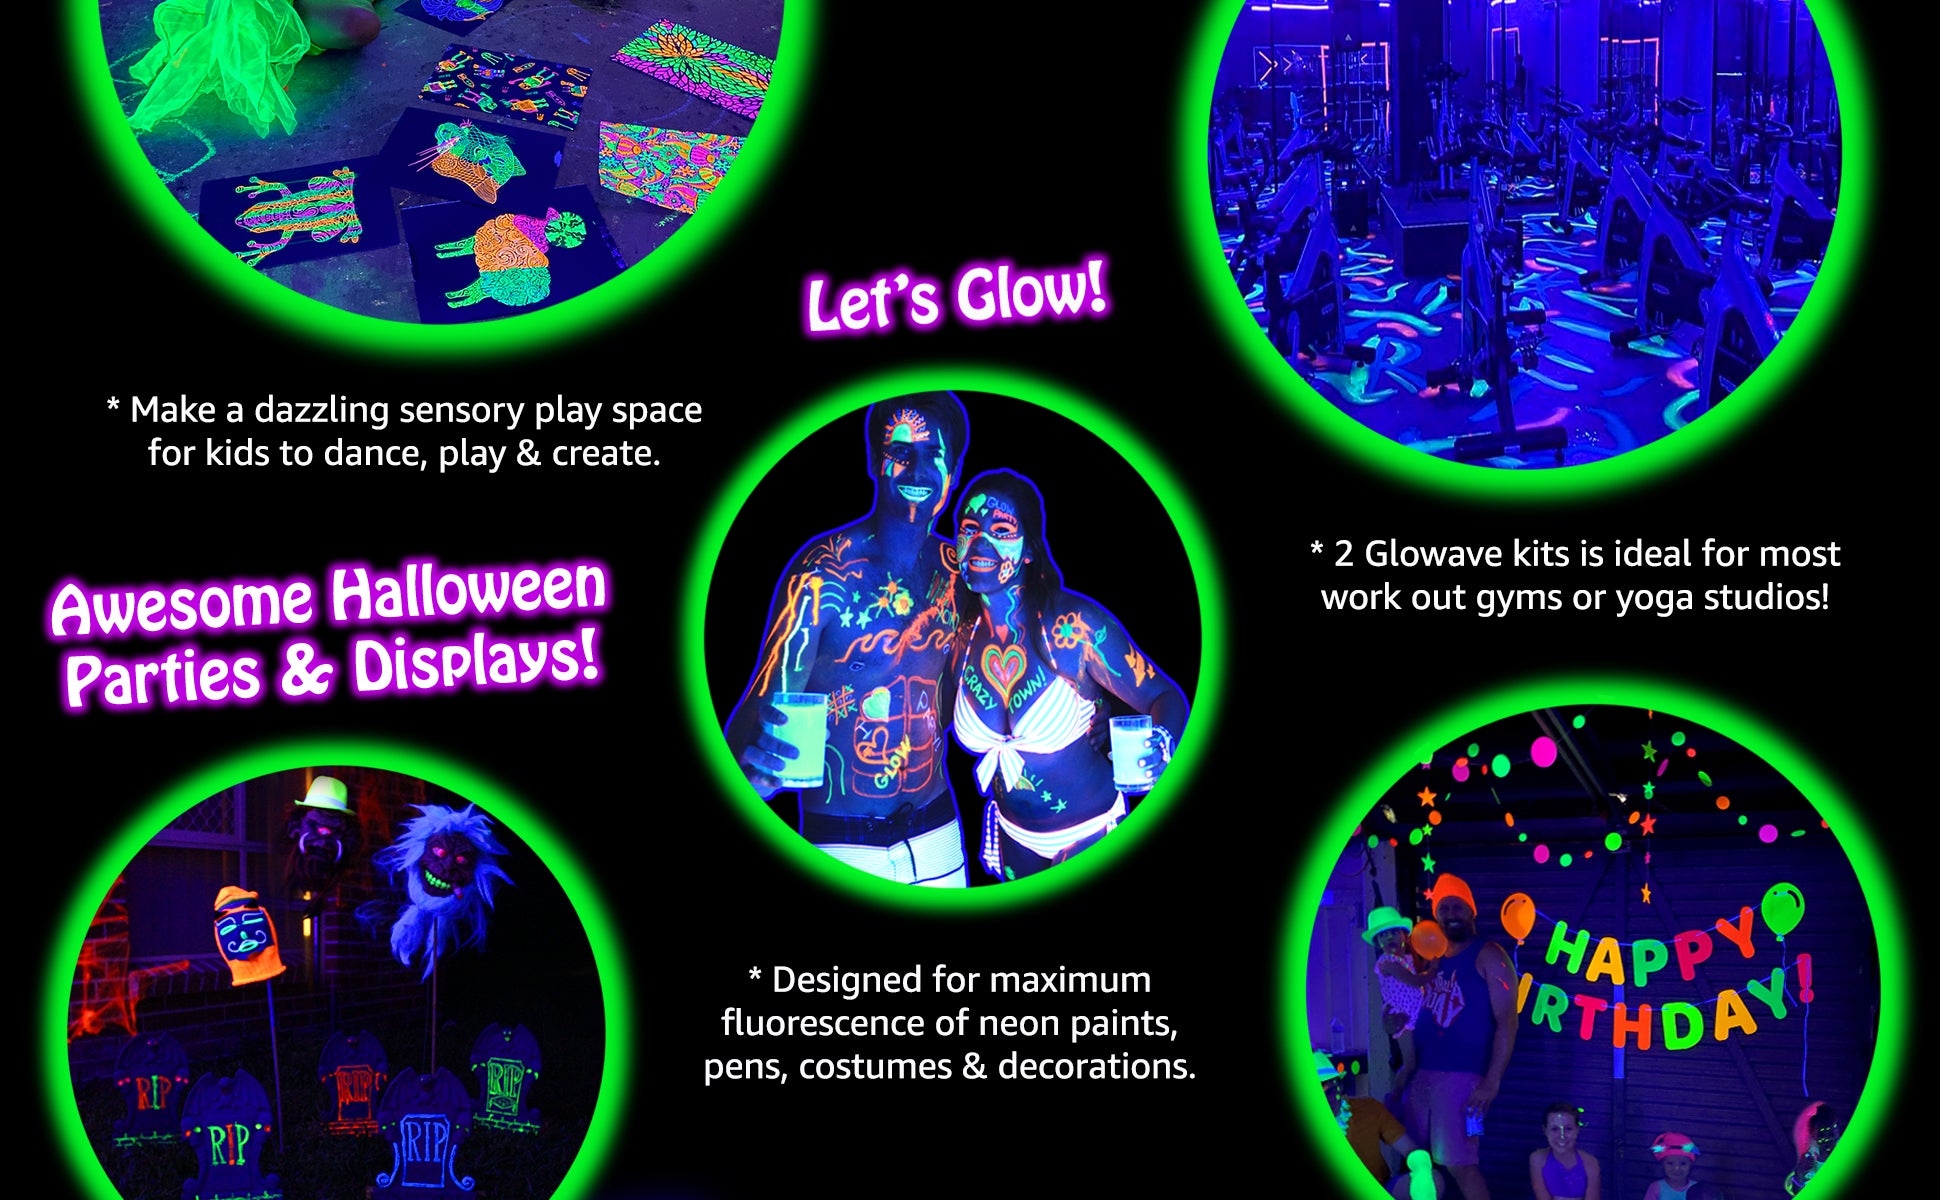 Black Light Parties Done Right — Ignight Entertainment